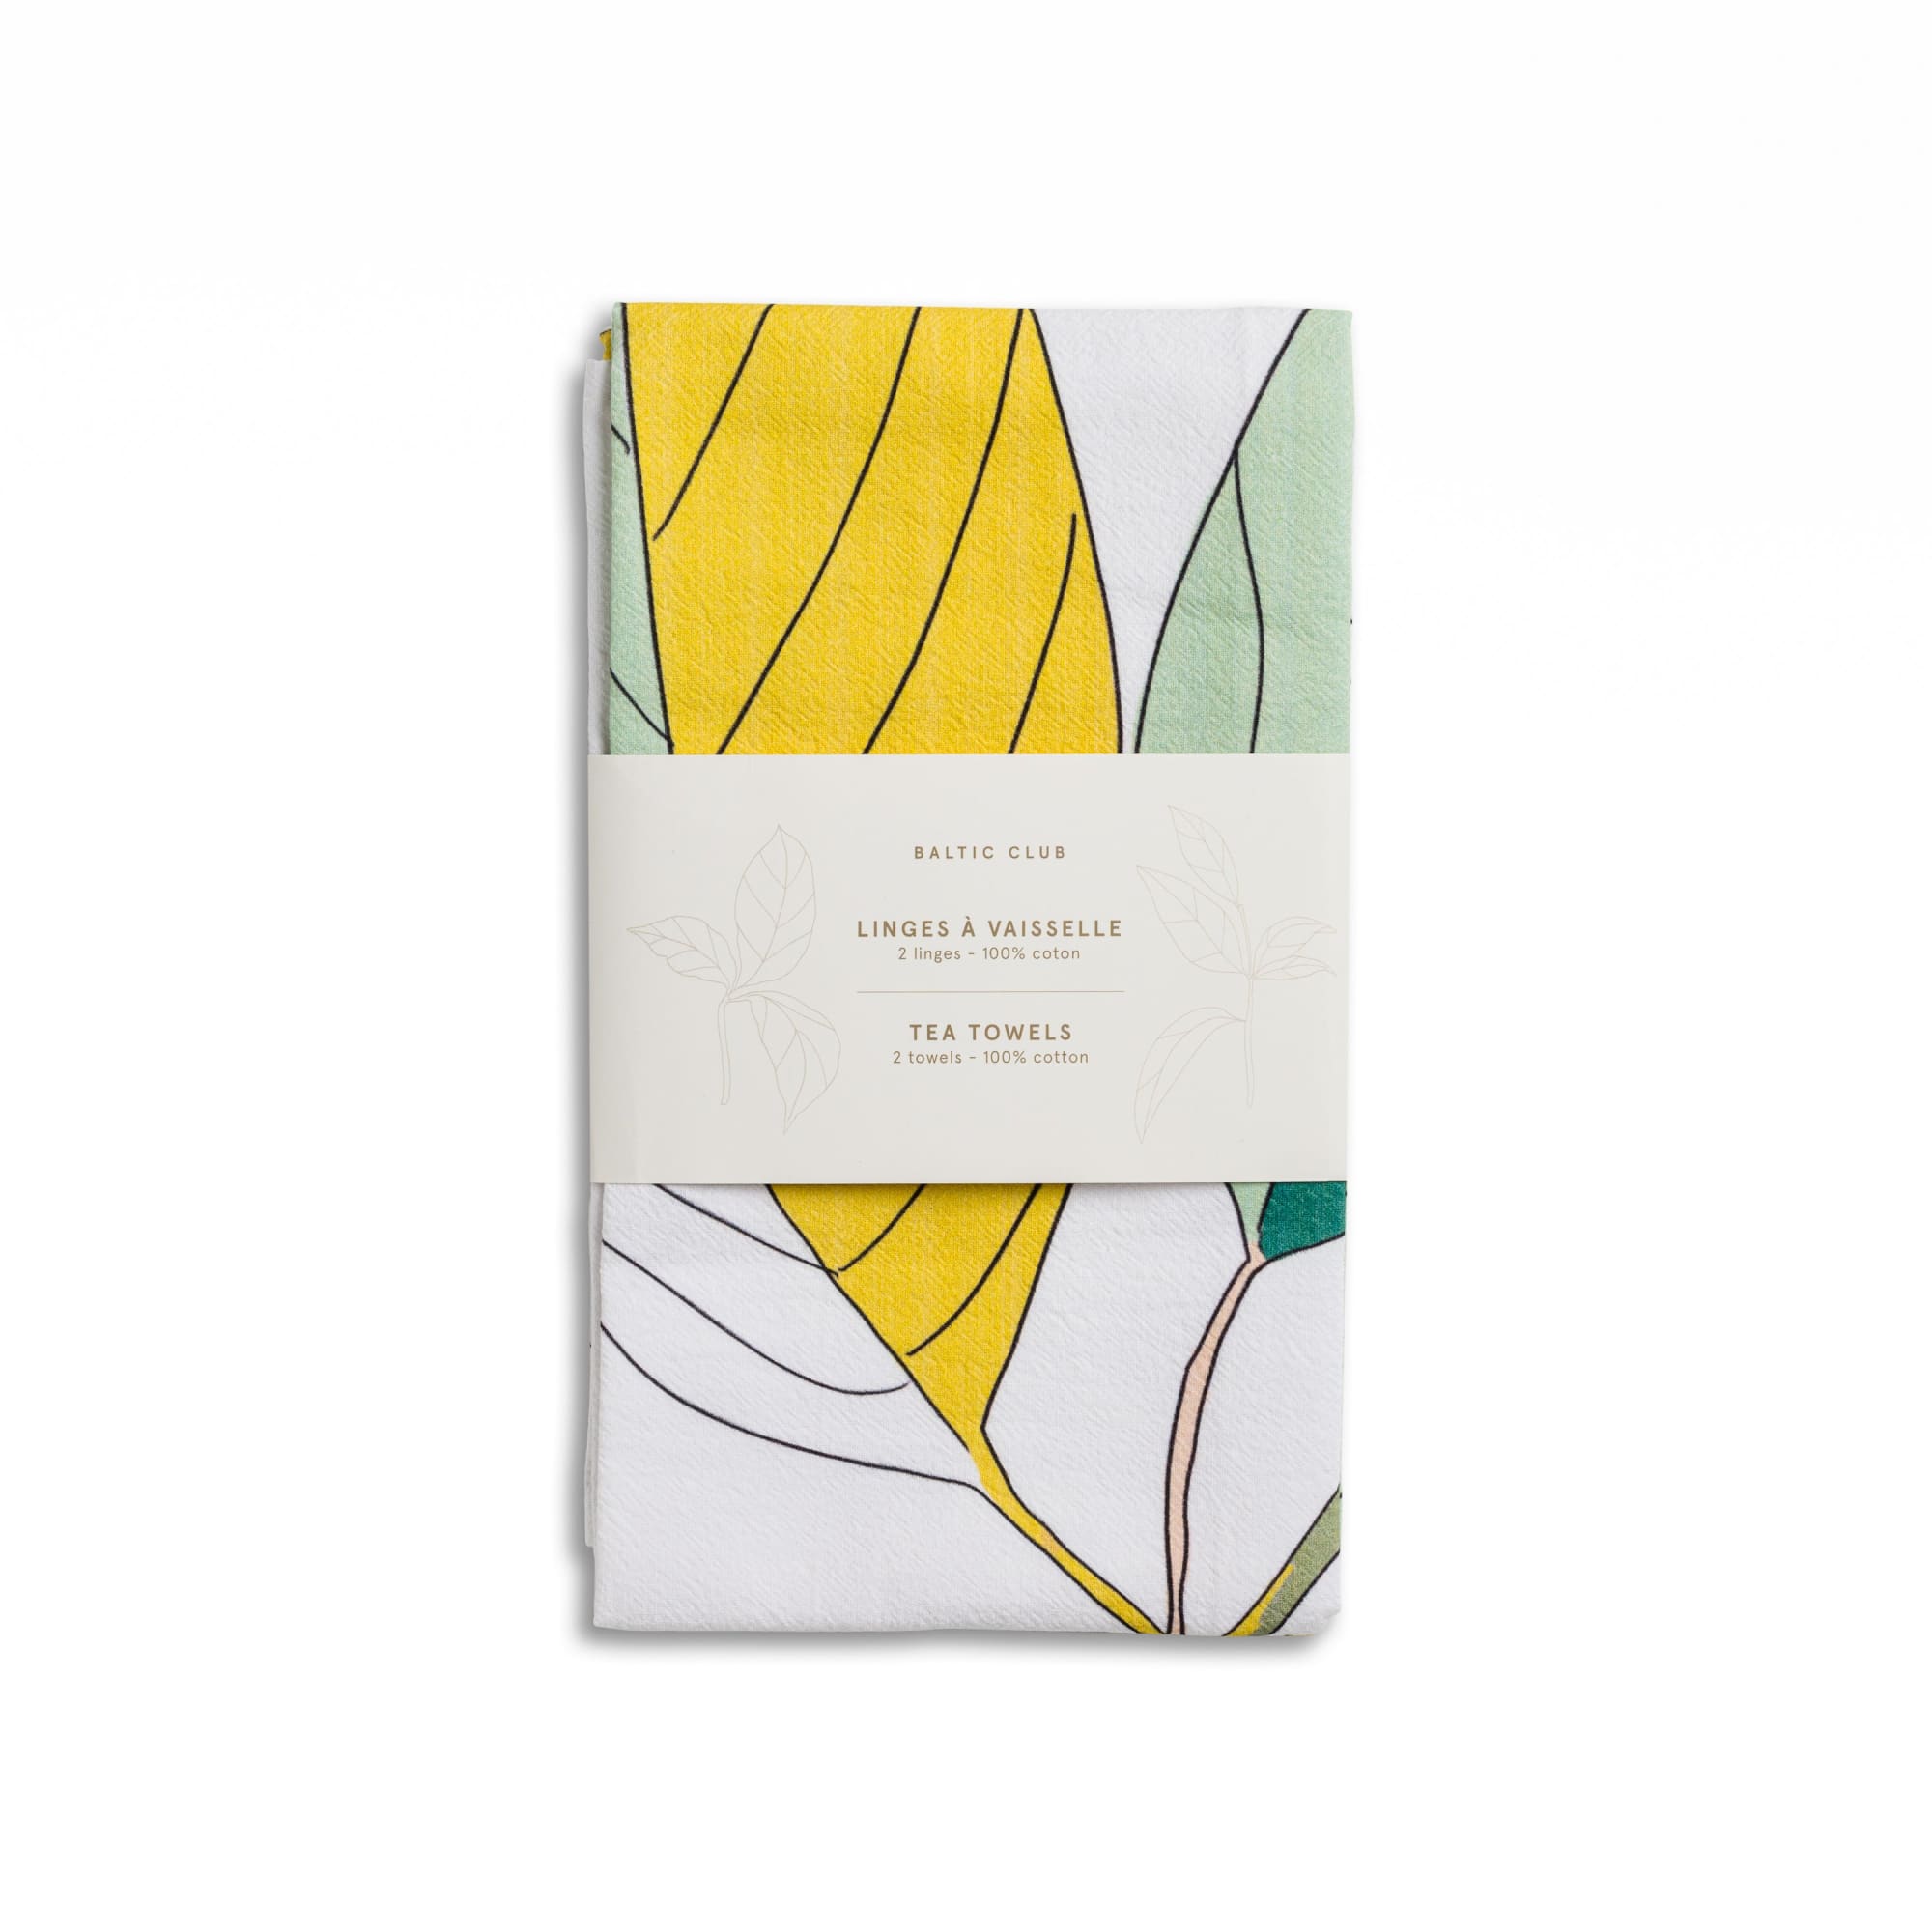 Packaging of the Herbal tea towels by the Baltic Club